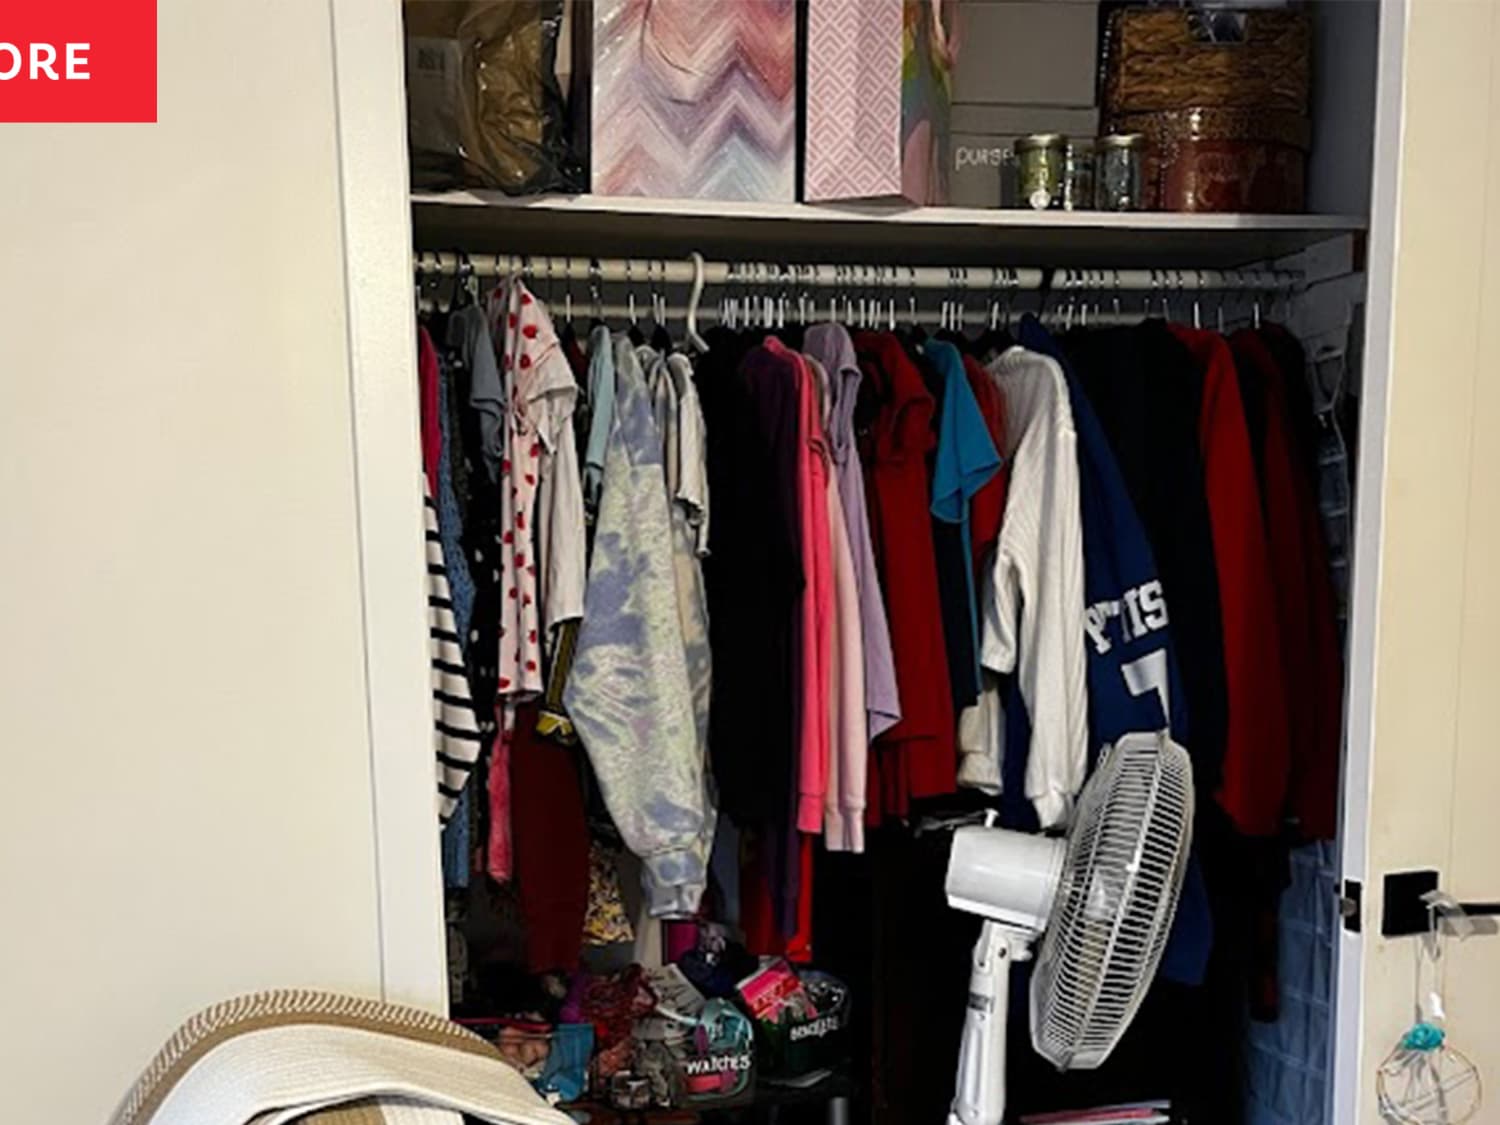 Shoppers Use the Doiown S-Hangers to Combat Closet Clutter